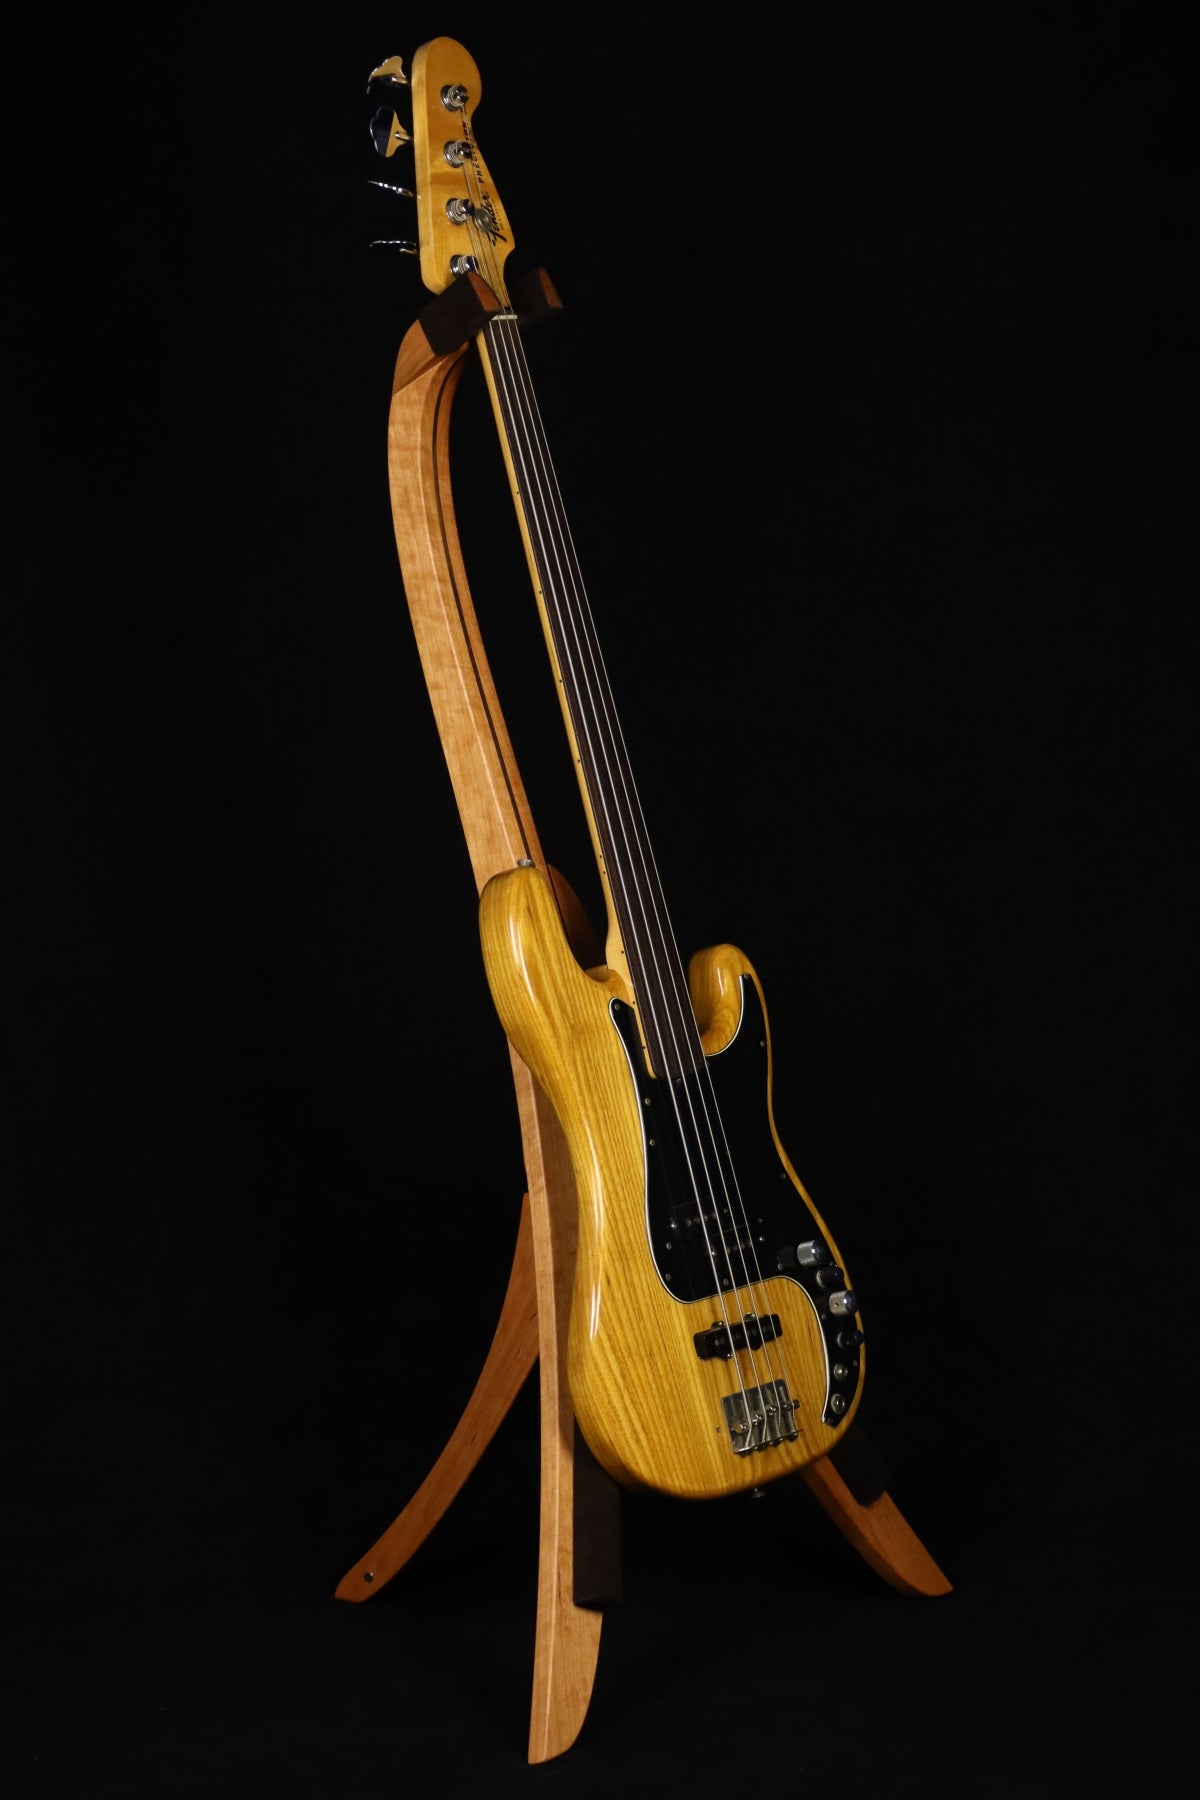 Folding cherry and walnut wood electric bass guitar floor stand full front image with Fender Precision 4 string fretless bass